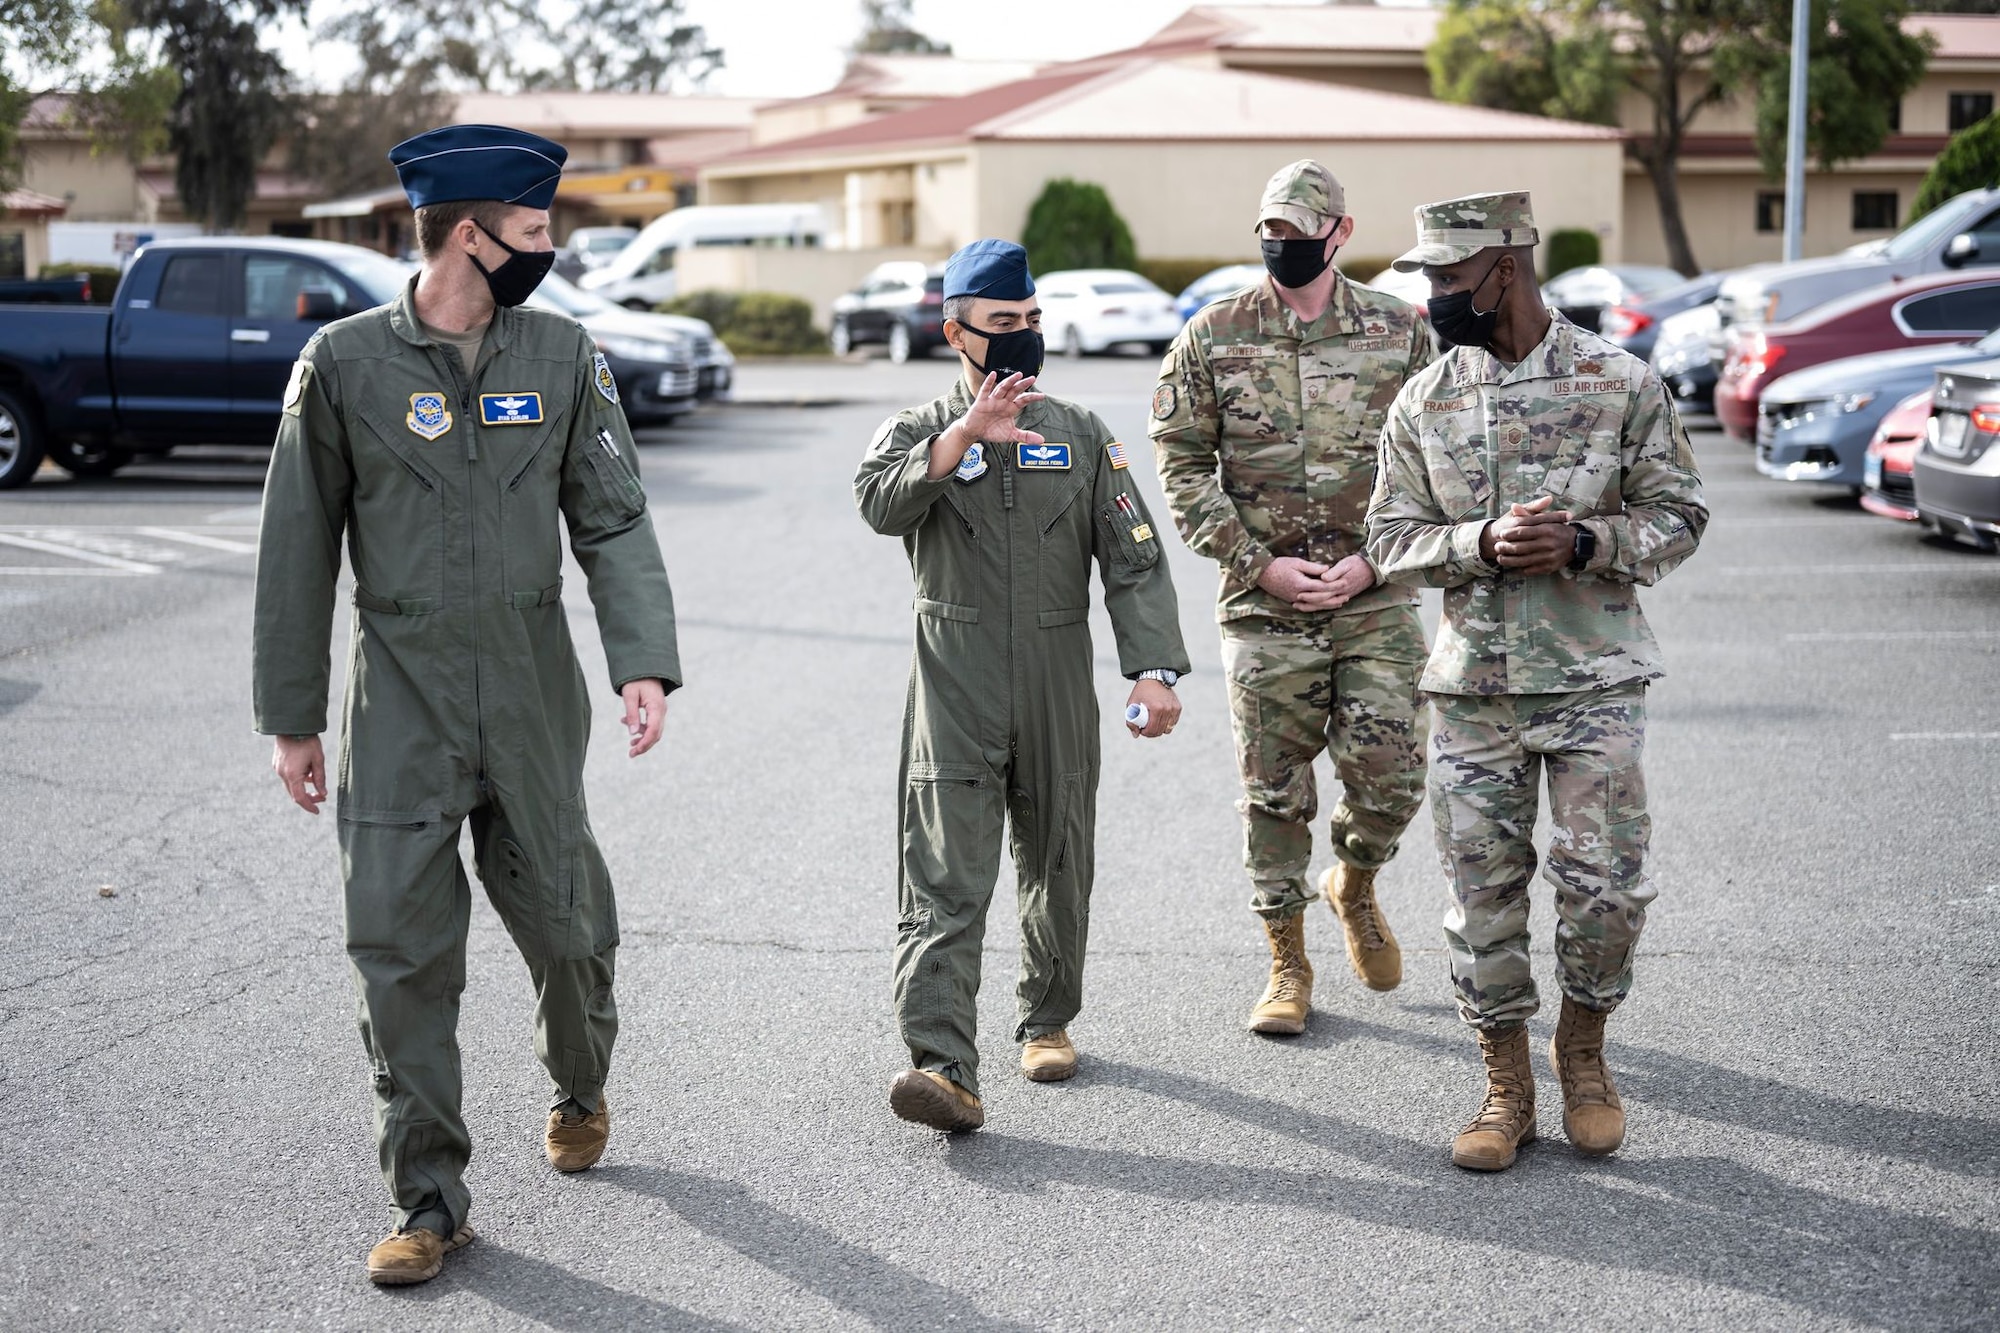 U.S. Air Force Col. Ryan Garlow, left, 60th Air Mobility Wing vice commander, and Chief Master Sgt. Erick Fierro, center left, 60th AMW interim command chief, speak with Master Sgt. Michael Powers, center right, and Master Sgt. Mario Francis, both 60th AMW Honor Guard superintendents, during Leadership Rounds Oct. 7, 2021, at Travis Air Force Base, California. Garlow and Fierro toured the base’s Honor Guard building, Child Development Center and dining facility to see a sample of the 60th Force Support Squadron mission. The Leadership Rounds program is designed to provide 60th AMW leadership an opportunity to interact with Airmen and receive a detailed view of each mission performed at Travis AFB. (U.S. Air Force photo by Staff Sgt. Christian Conrad)